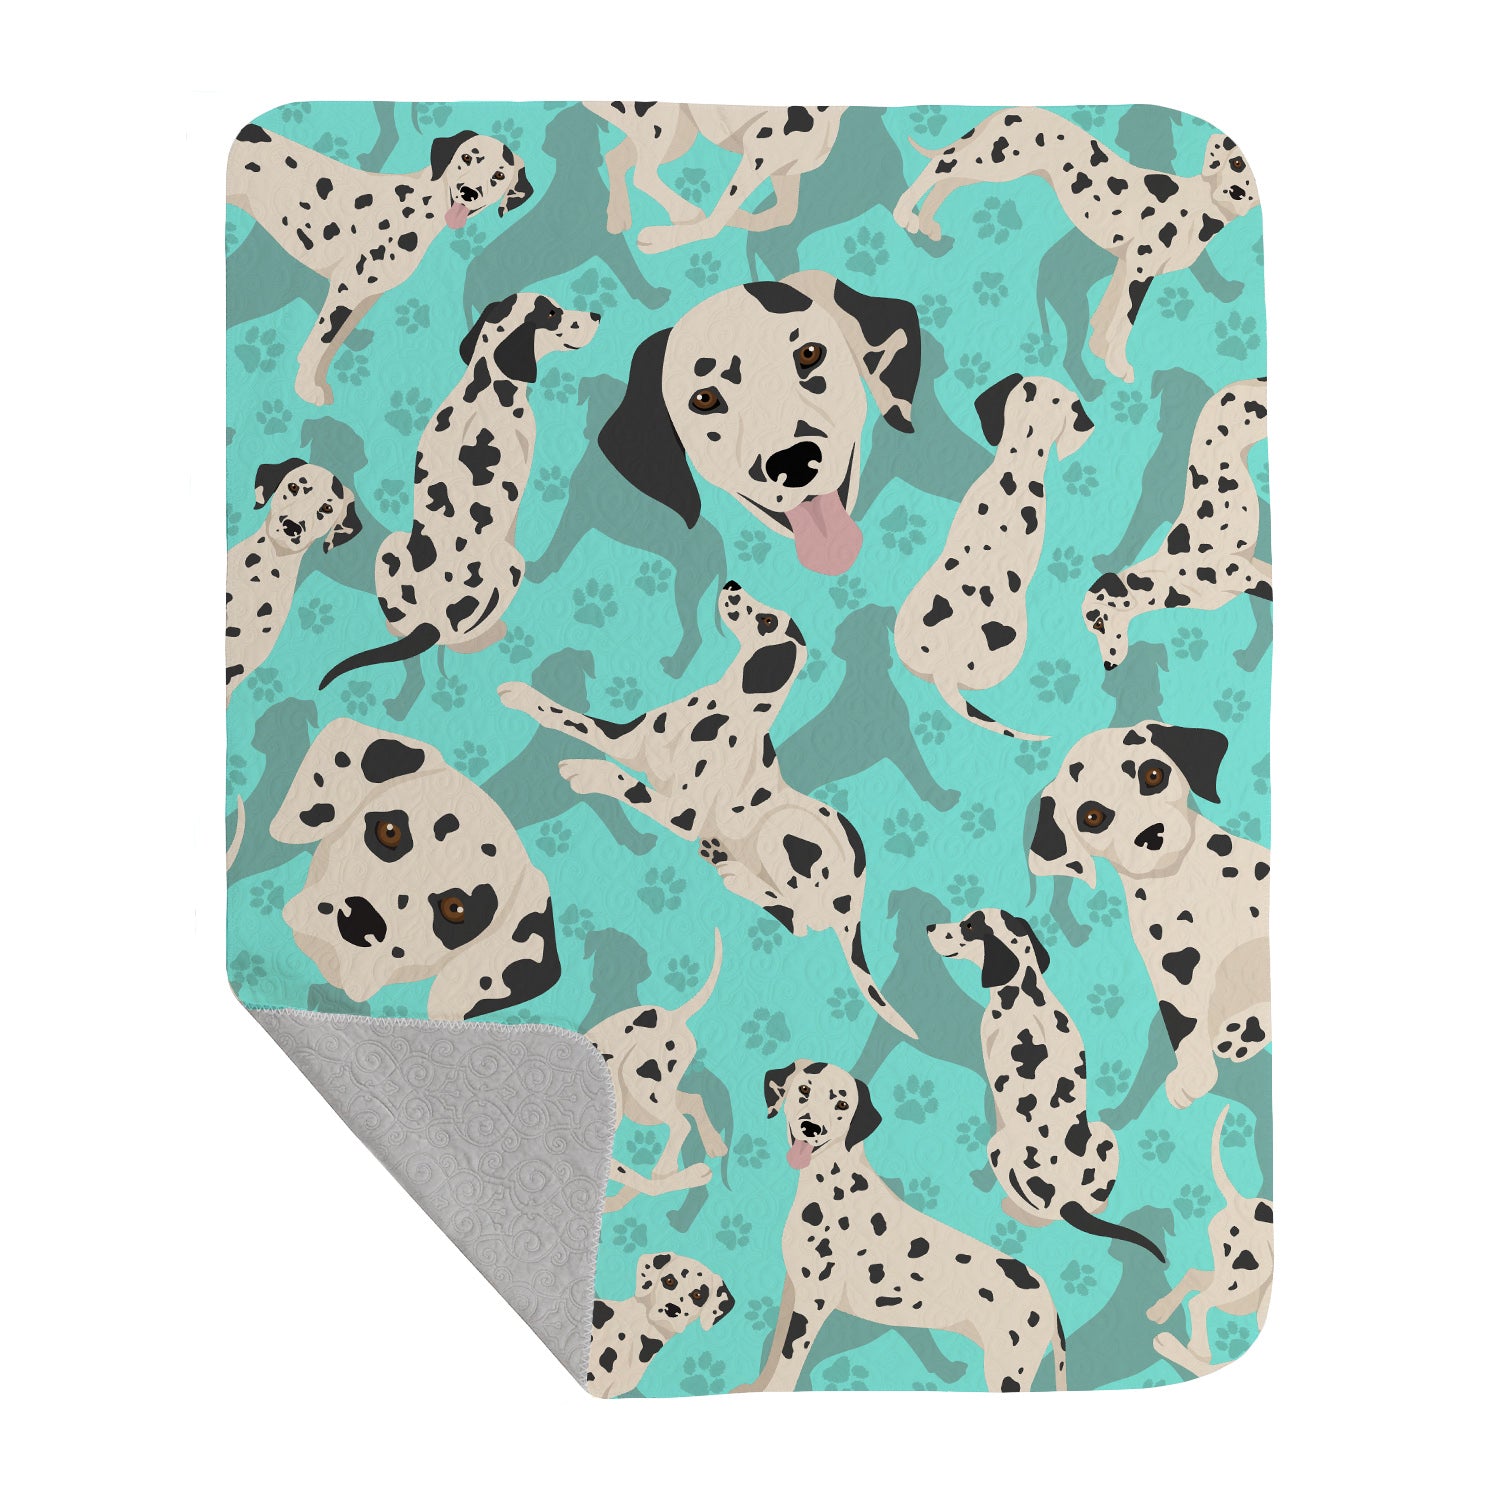 Buy this Dalmatian Quilted Blanket 50x60